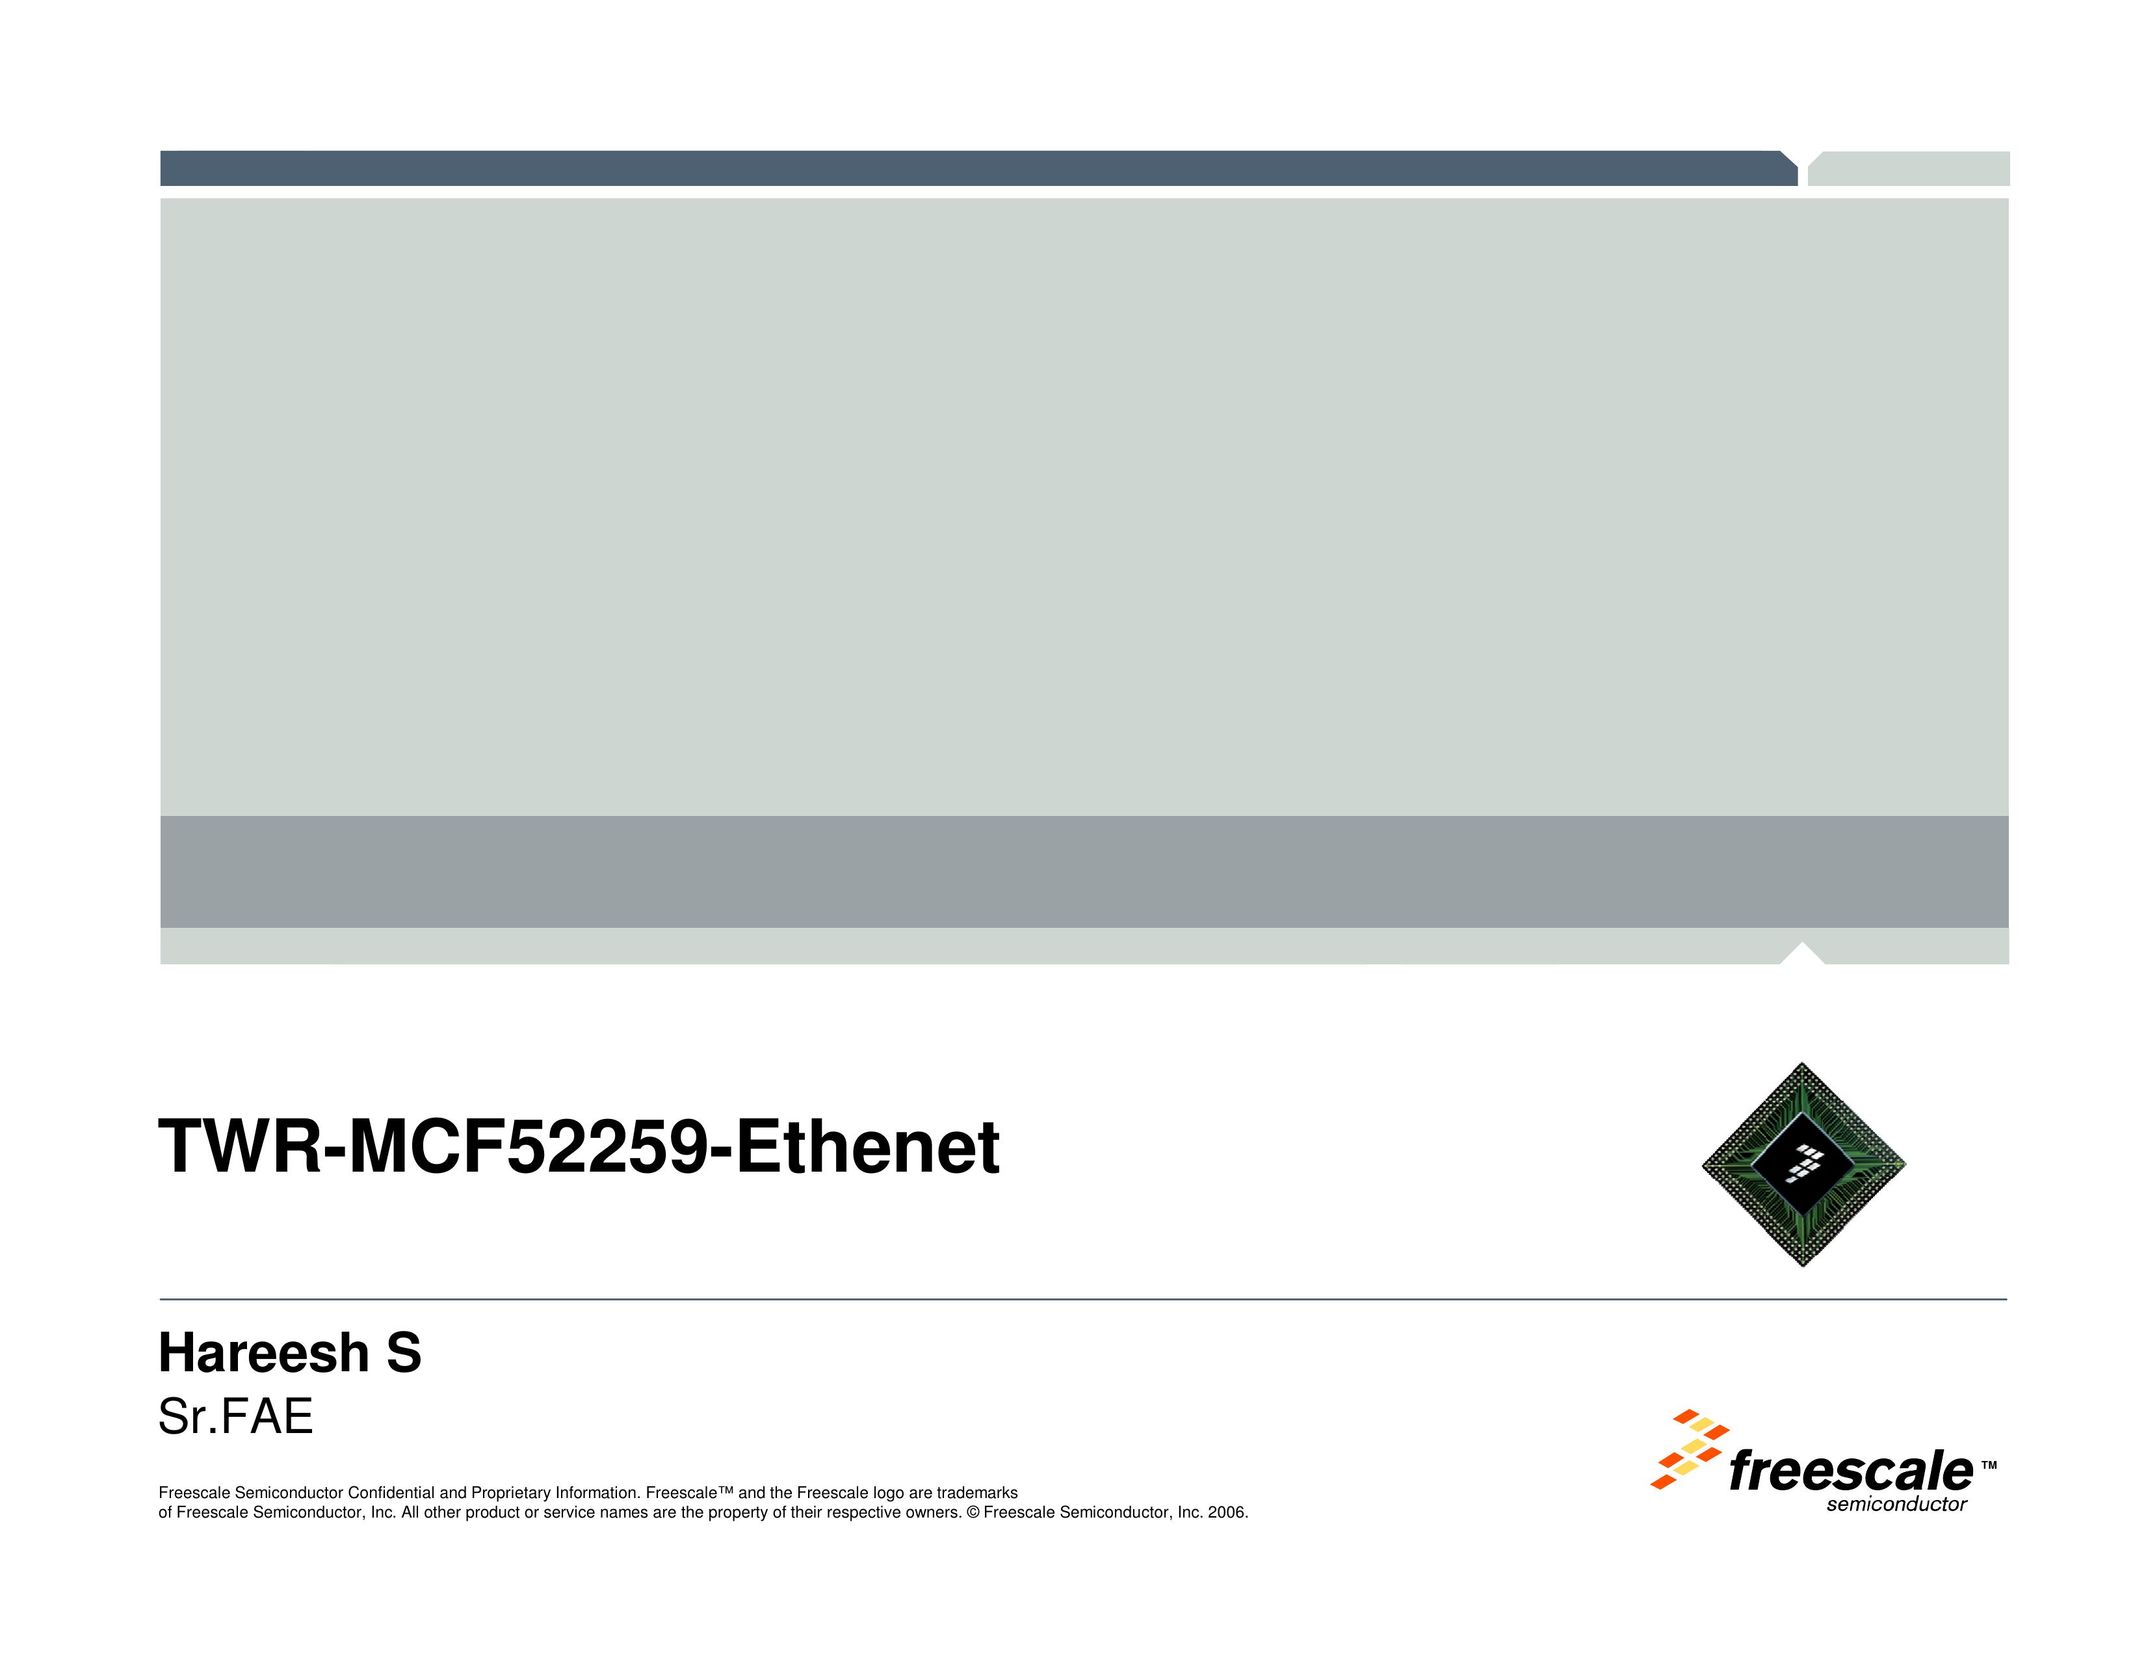 Freescale Semiconductor TWR-MCF52259-Ethenet Network Router User Manual